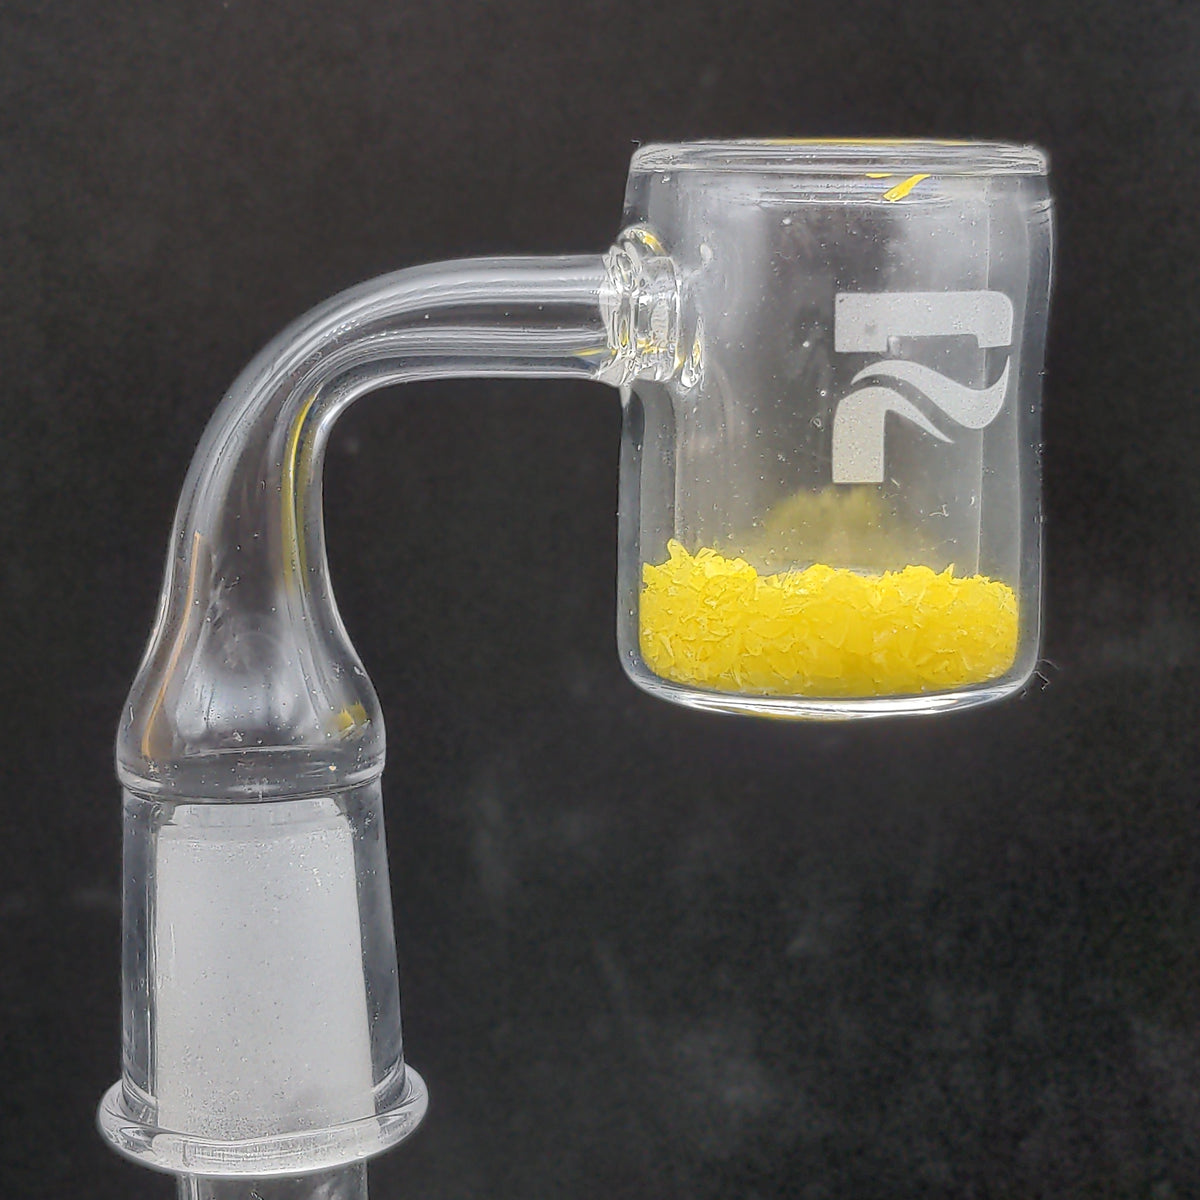 Smoking Accessories Bong Accessories - 14mm Female Quartz Thermo